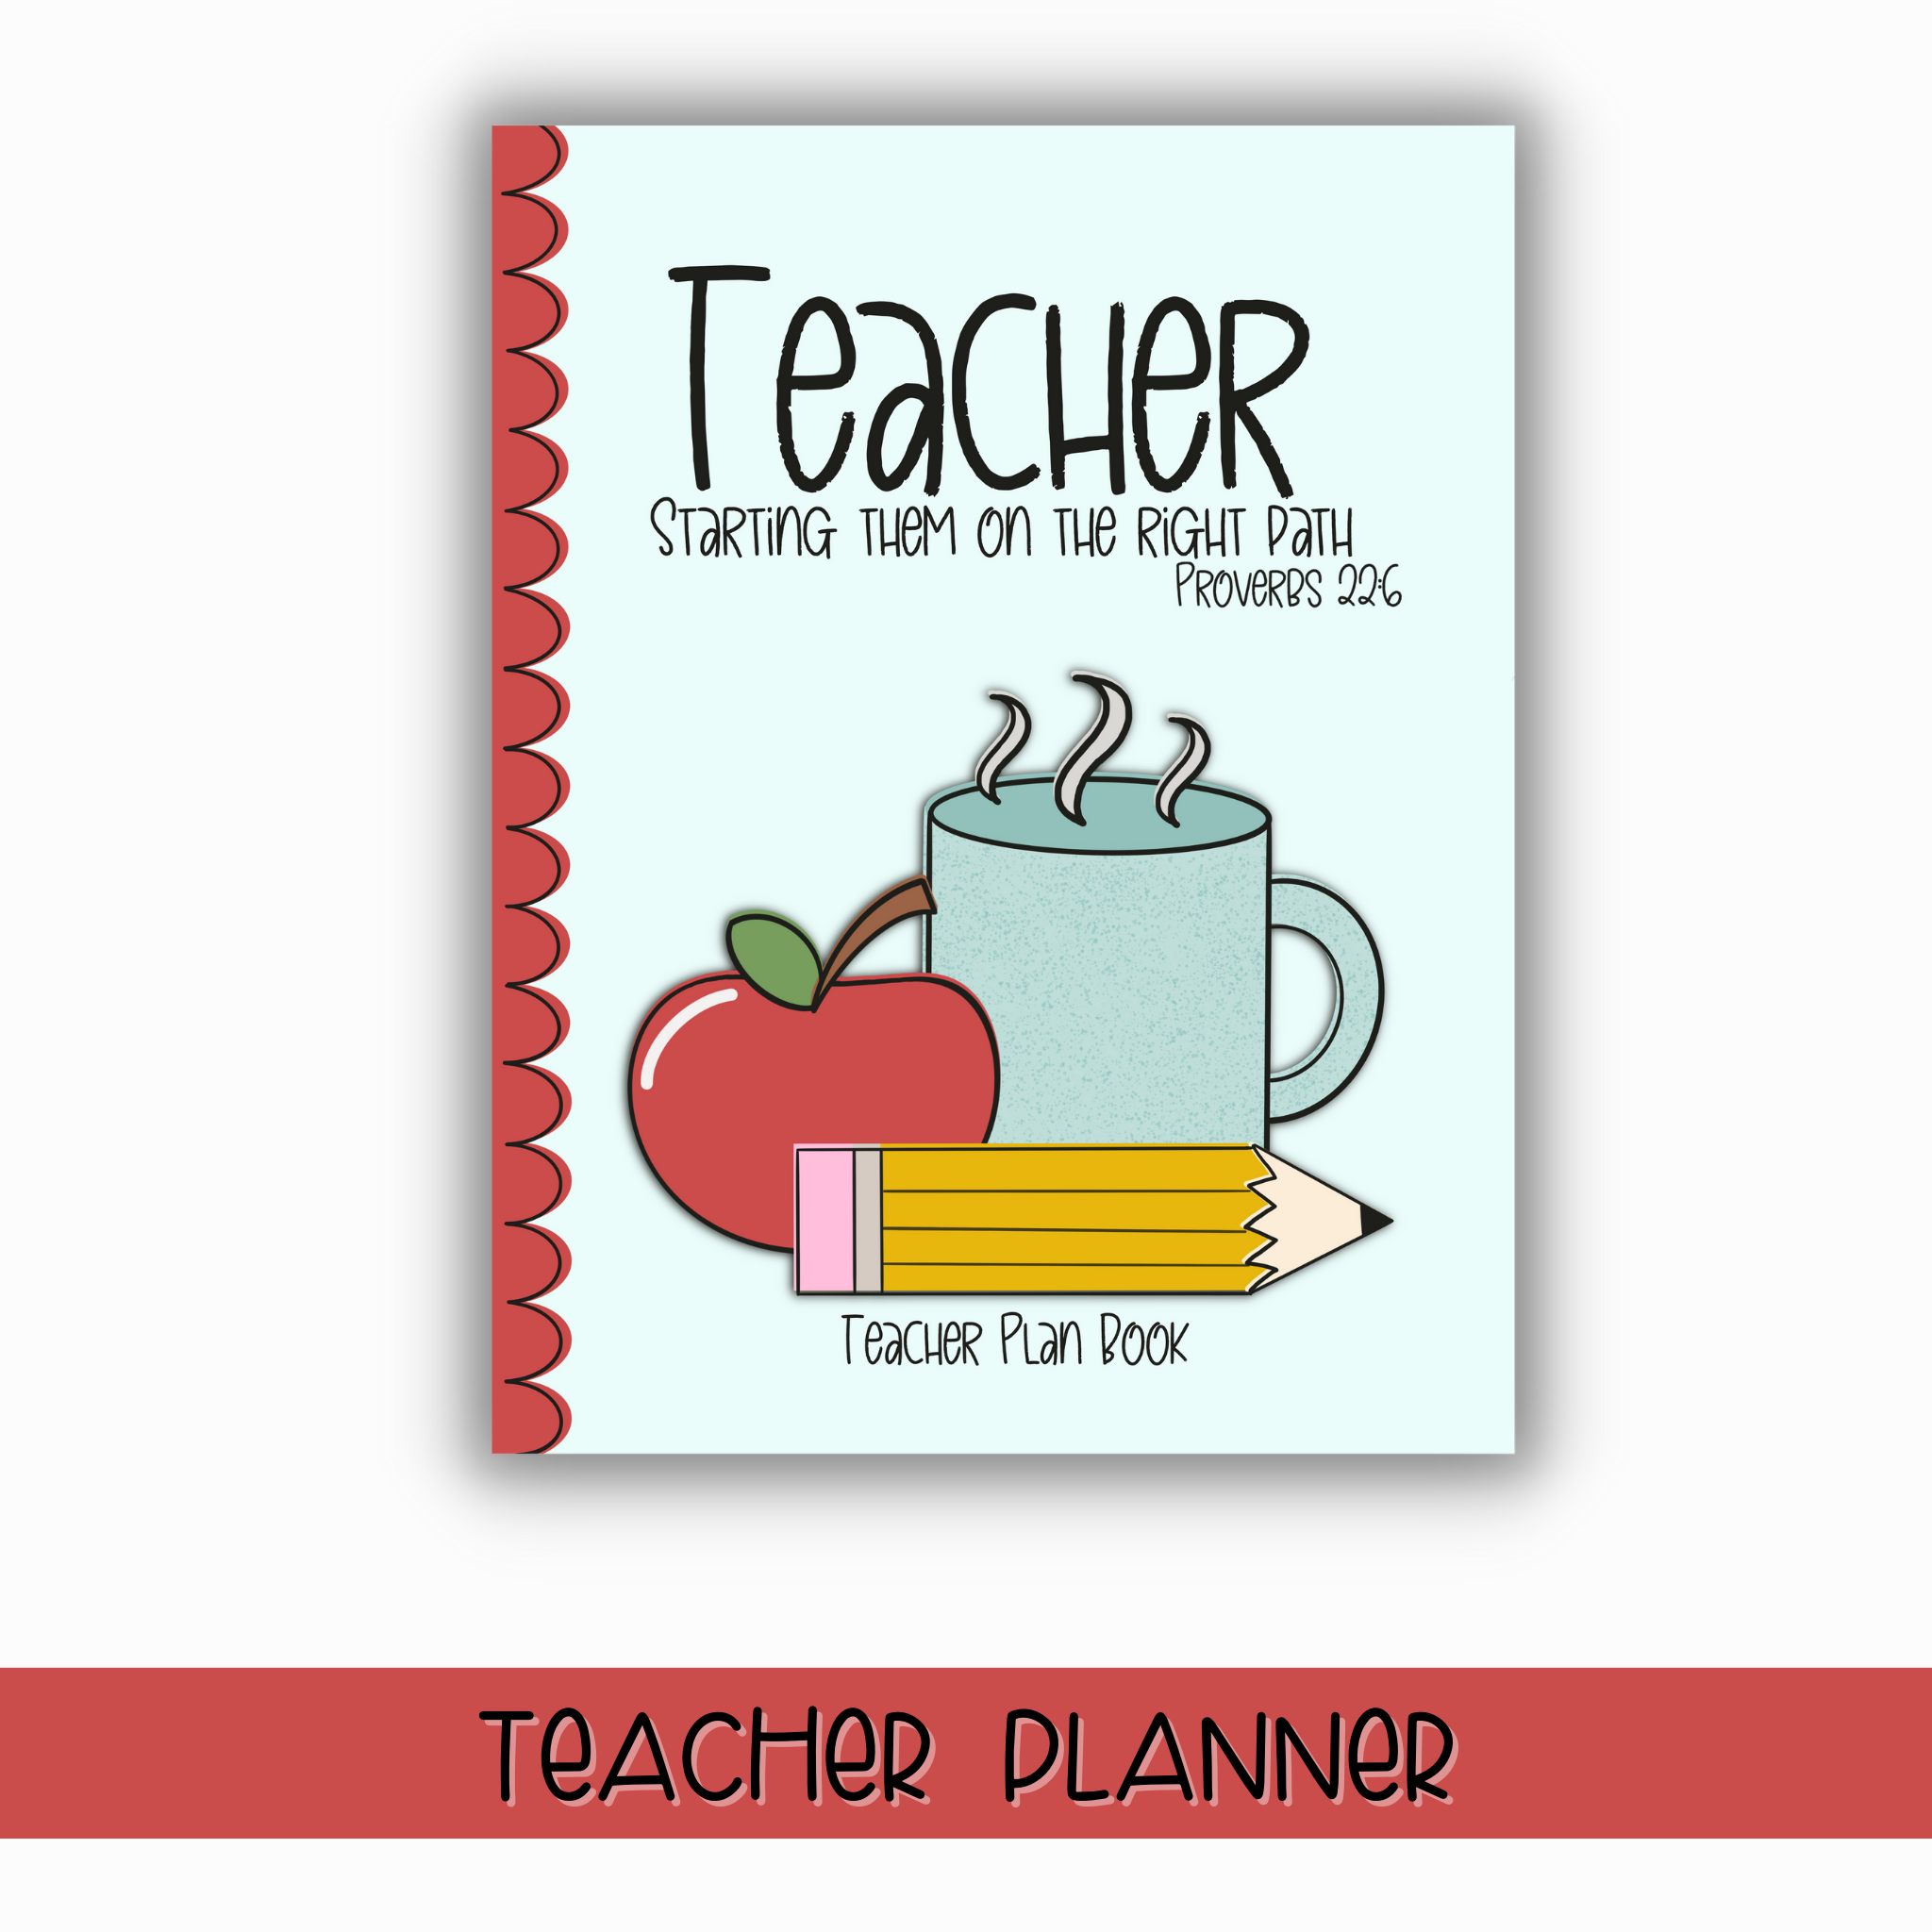 Teacher Teaching Planner or Plan Book self published with Amazon KDP and Kindle Direct Publishing